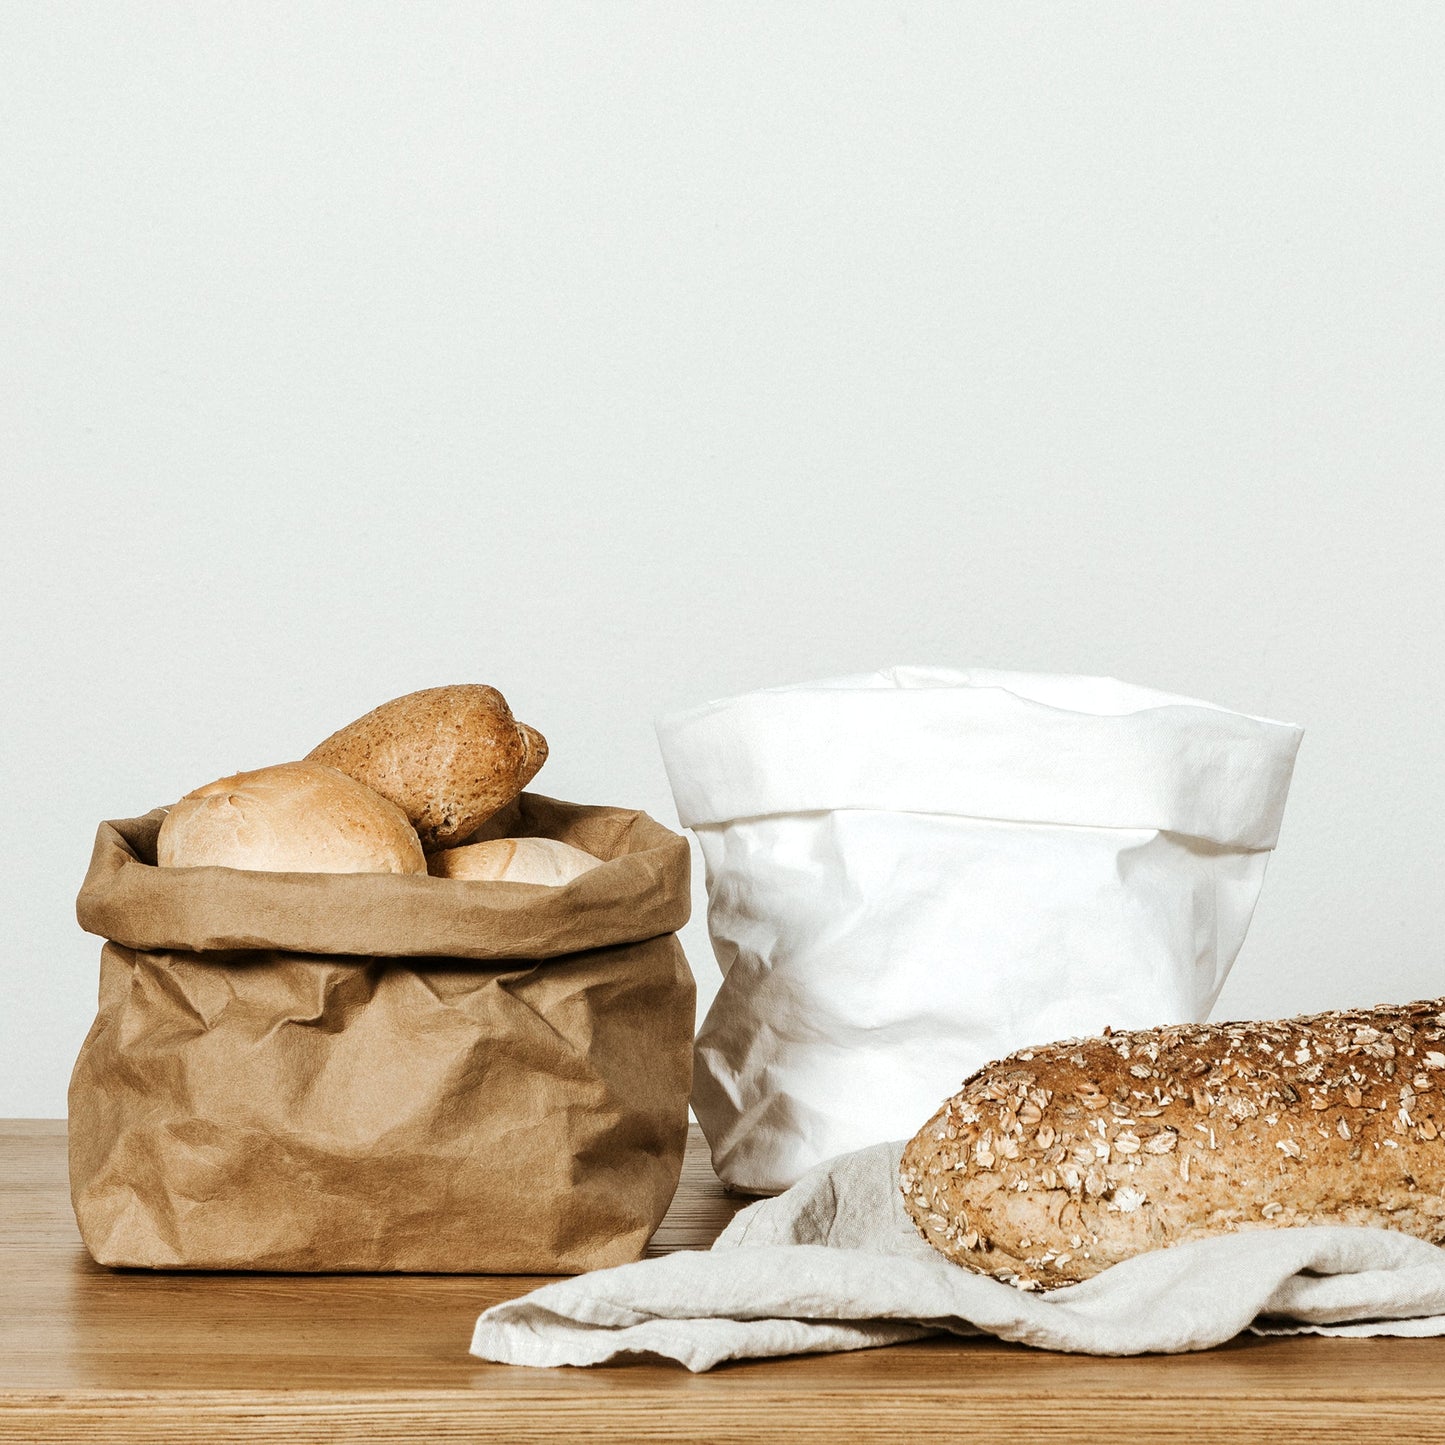 A washable paper bag is shown. The bag is rolled down at the top and features a UASHMAMA logo label on the bottom left corner. The bag pictured is the medium size in tan. The tan paper bag is filled with bread rolls. Next to it is a medium washable paper bag in white which is empty. Also shown is a loaf of seeded bread lying on a linen napkin.